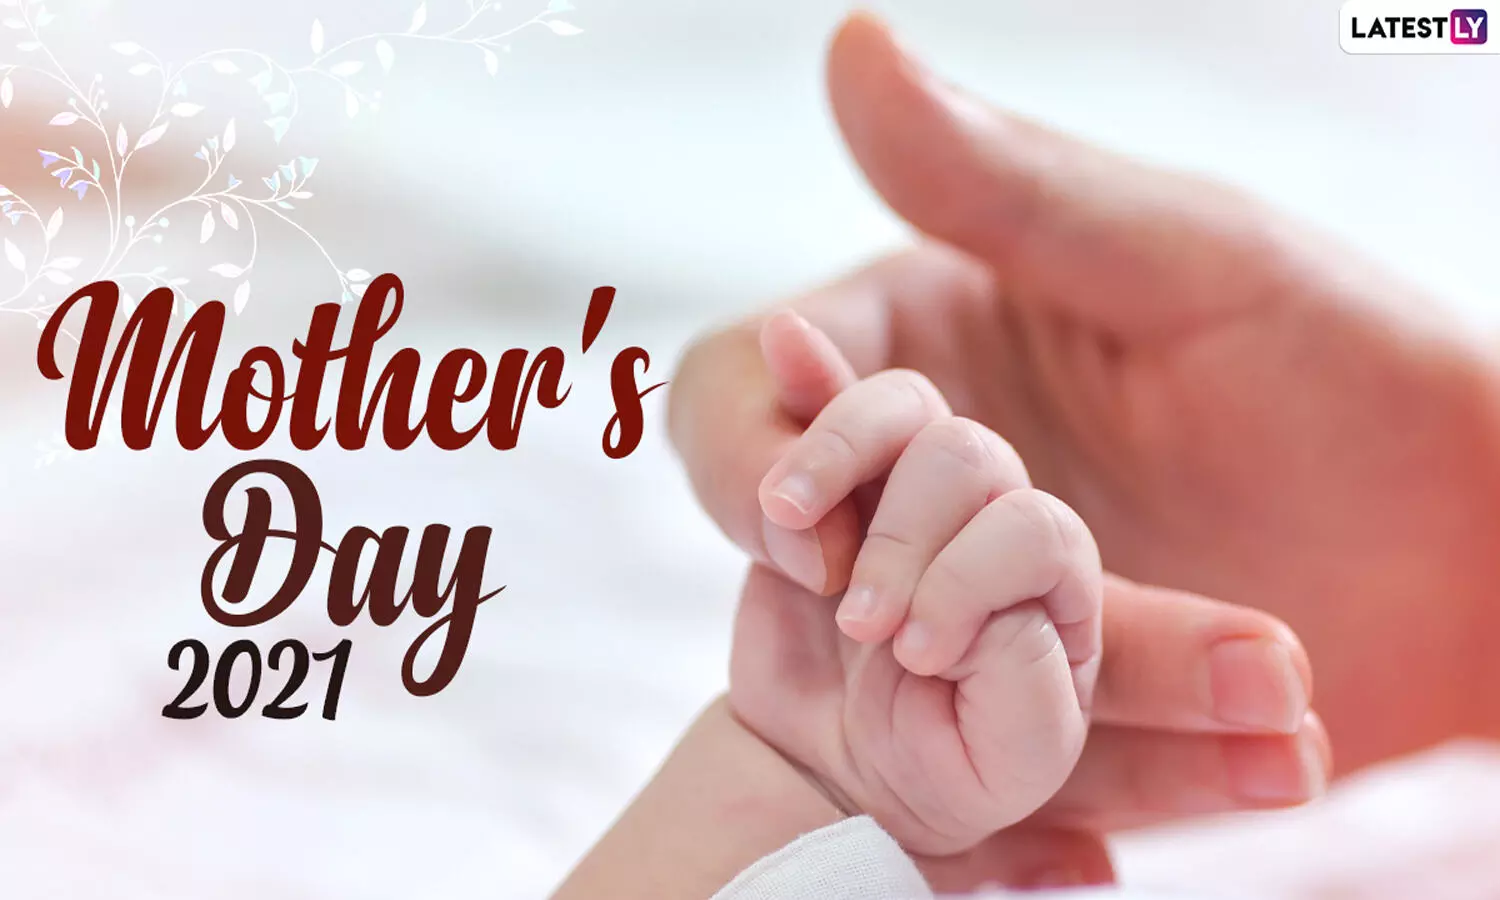 Mothers Day 2021: Here are some tips to thank your Mom & make her day special